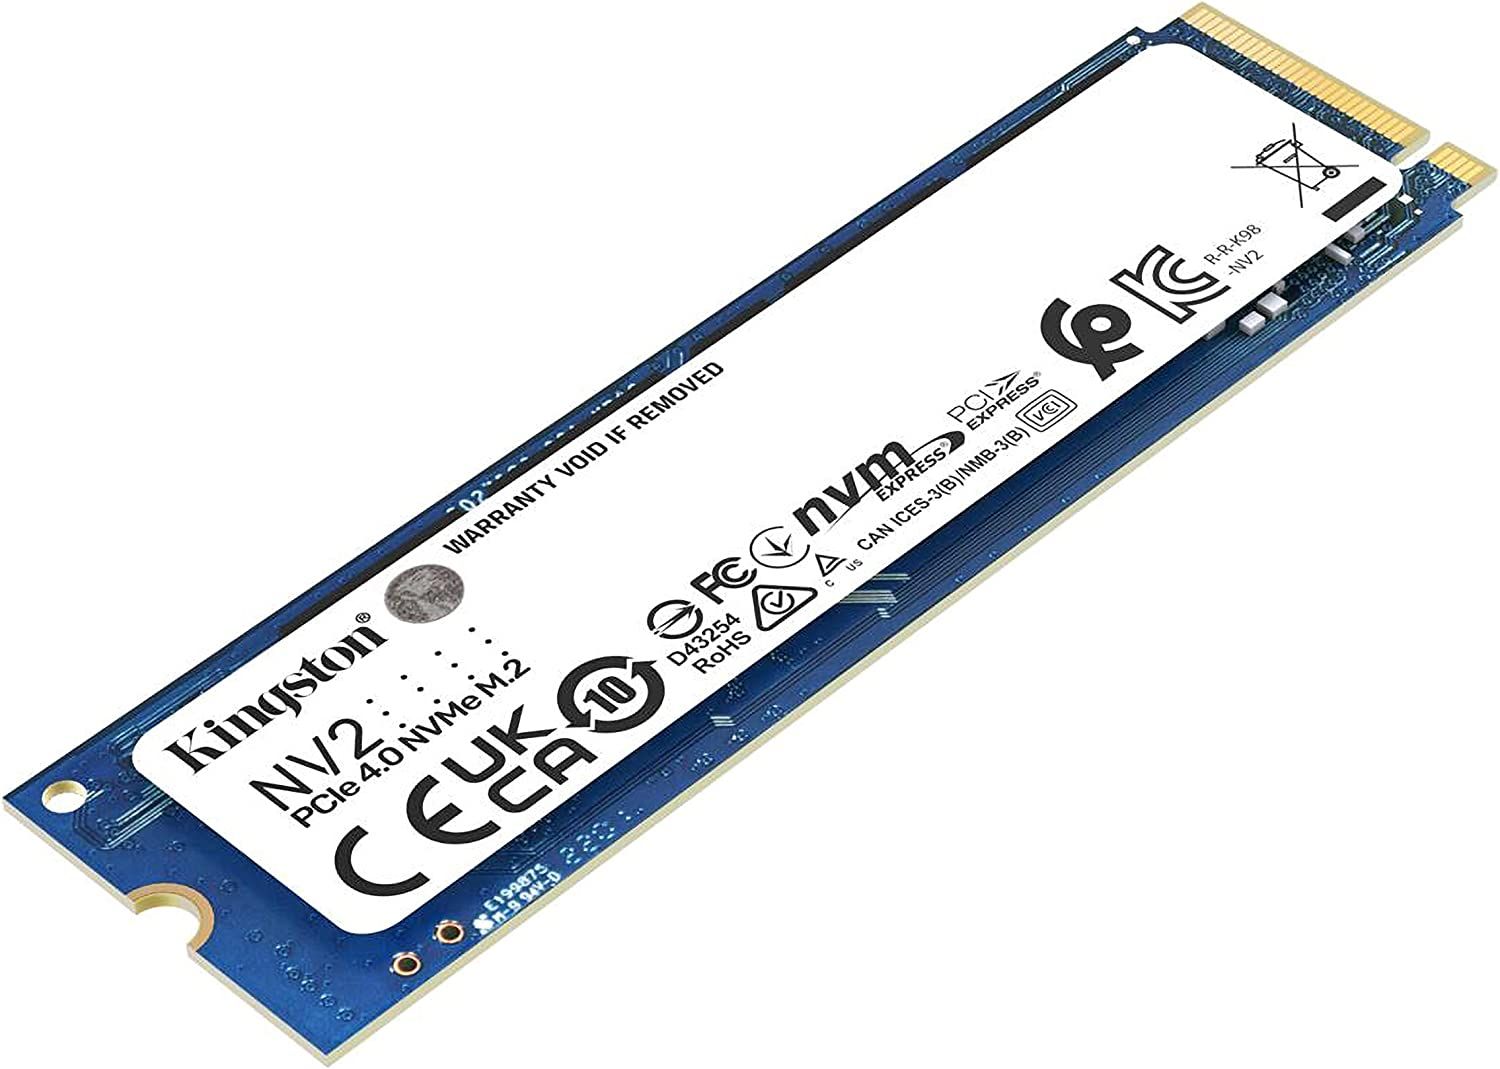 SNV2S/500G - SSD Kingston 500Gb M.2 2280 NVMe PCIe 4.0 Lectura 3500Mb/s Escritura 2100 Mb/s PC/Notebook (SNV2S/500G)